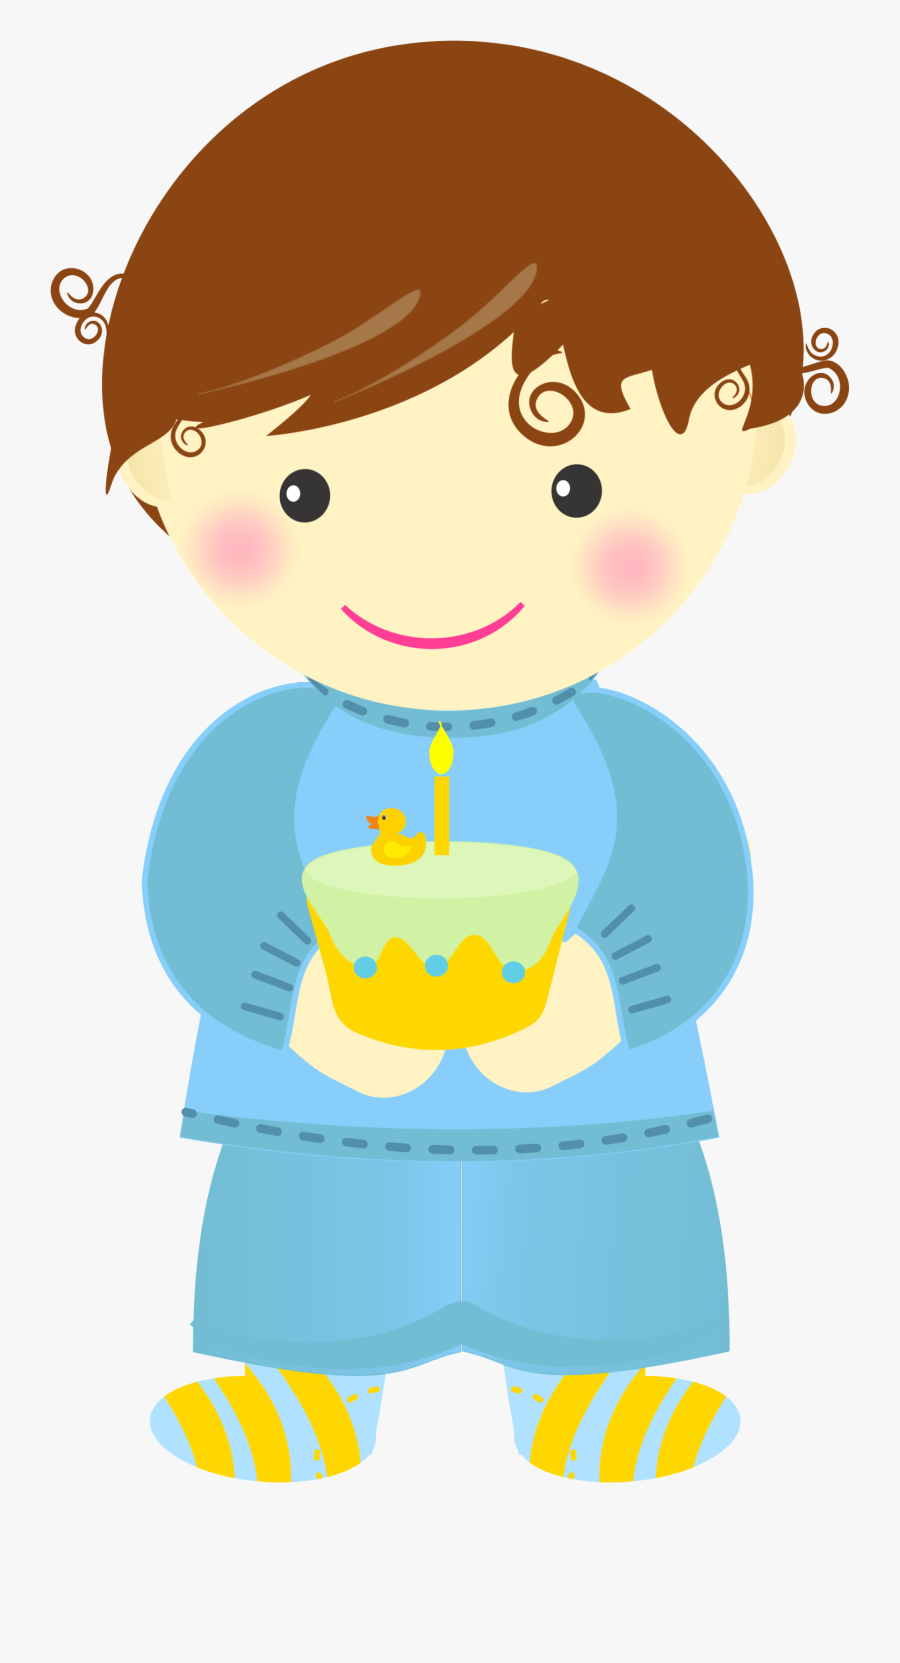 Baby"s First Birthday Clip Art - Happy Birthday Baby Clipart, Transparent Clipart